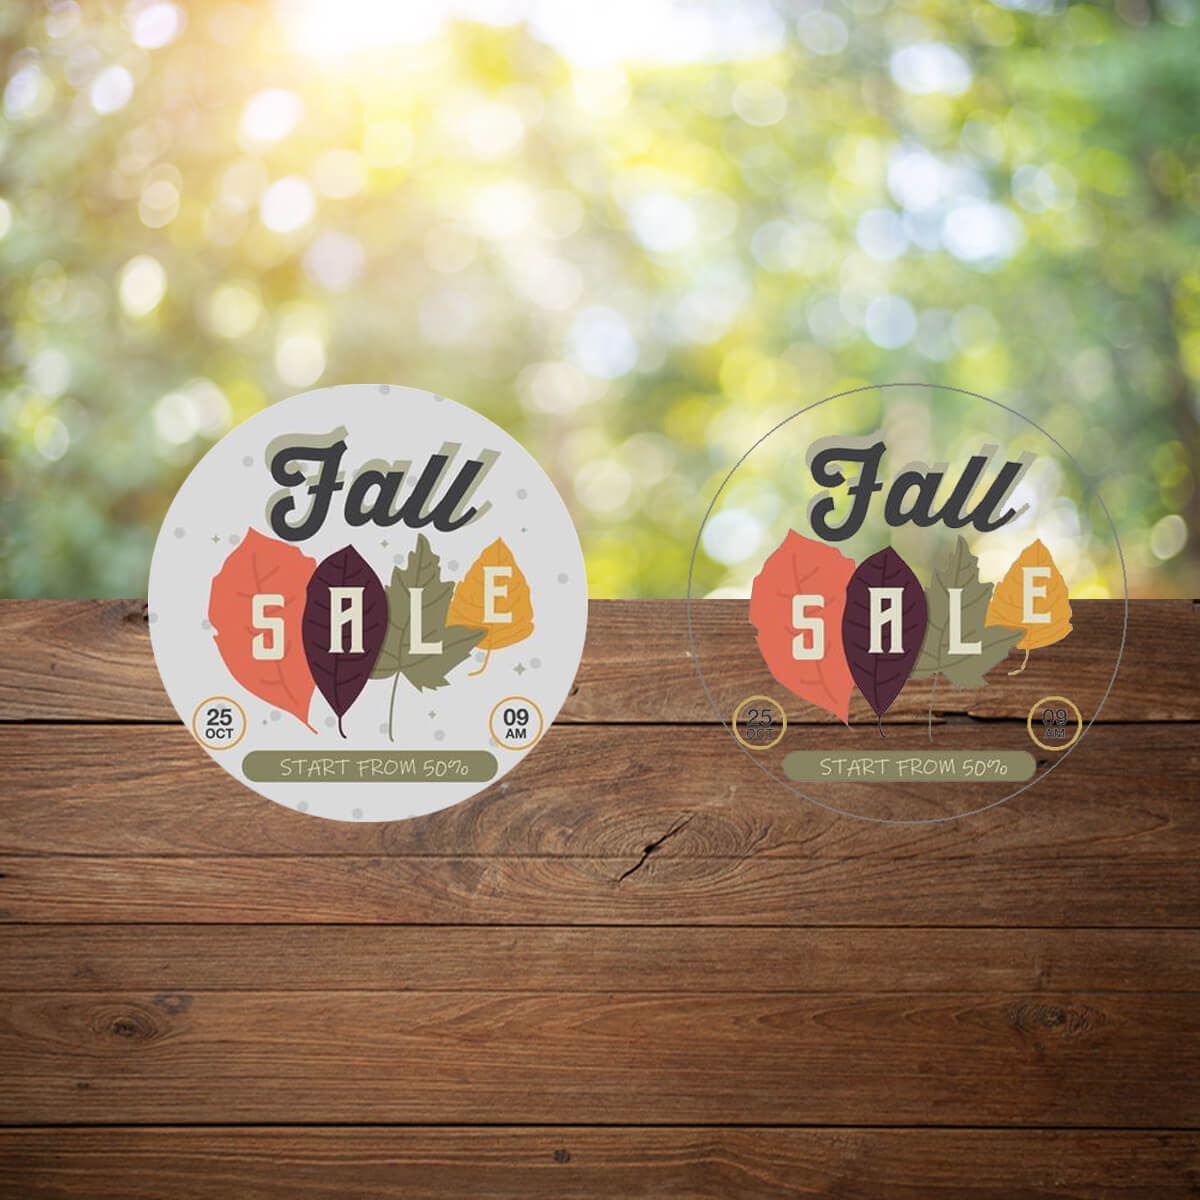 Fall round clear sticker graphic promotional decal label by Curative Printing